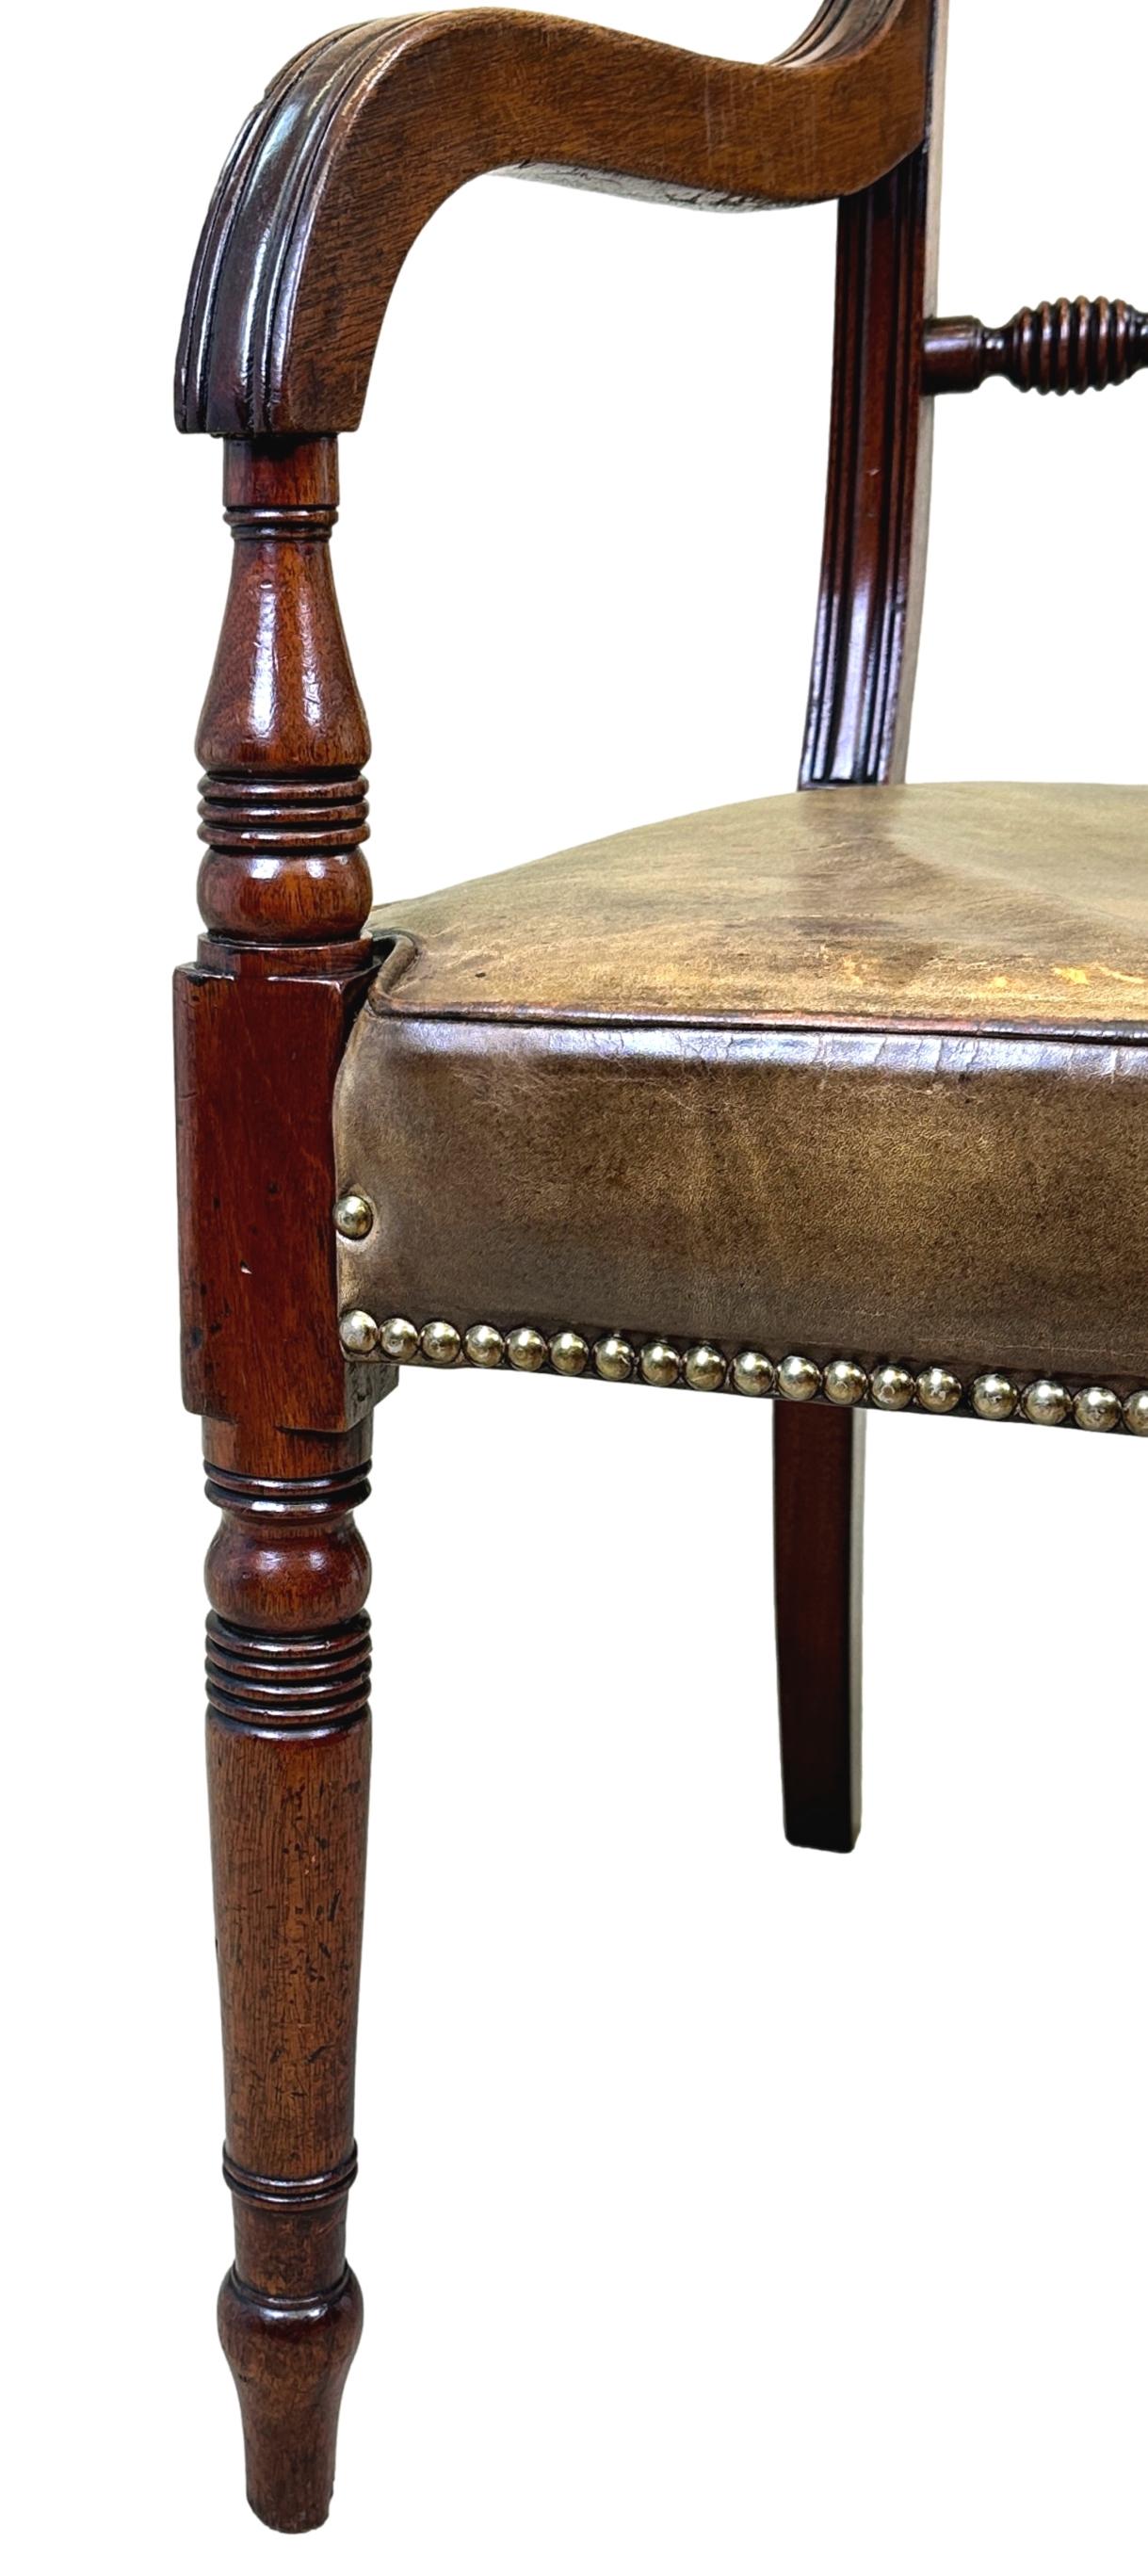 A Very Good Quality Early 19th Century, Regency Period, Mahogany Desk Armchair Having Superbly Figured Top Rail And Carved Rope Twist Decoration To Back, With Scrolling Arms And Leather Upholstered Seat, Raised On Elegant Turned Tapering